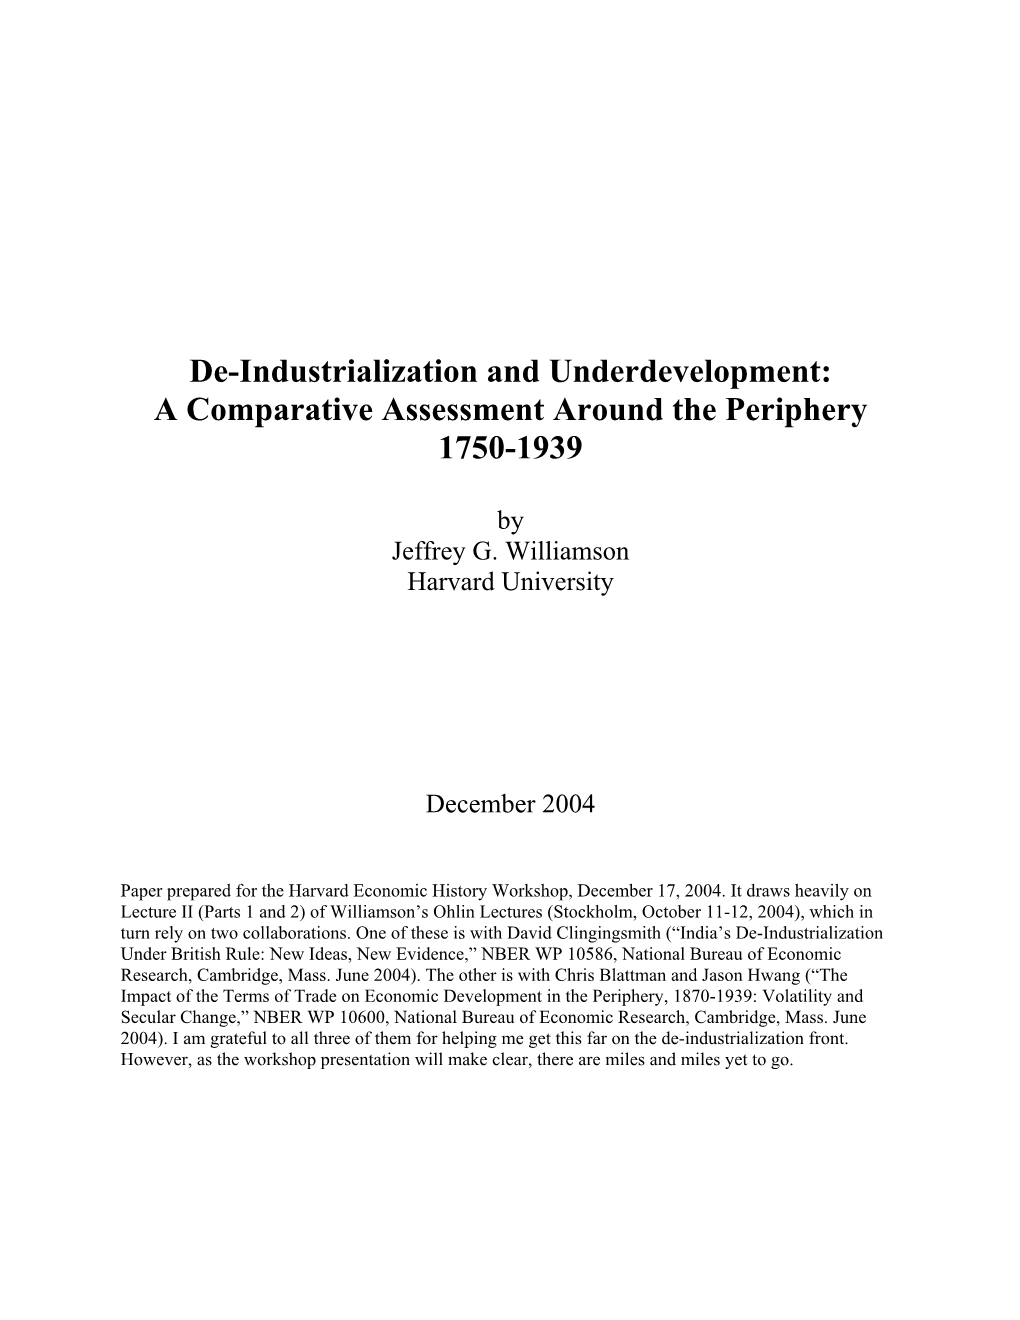 De-Industrialization and Underdevelopment: a Comparative Assessment Around the Periphery 1750-1939